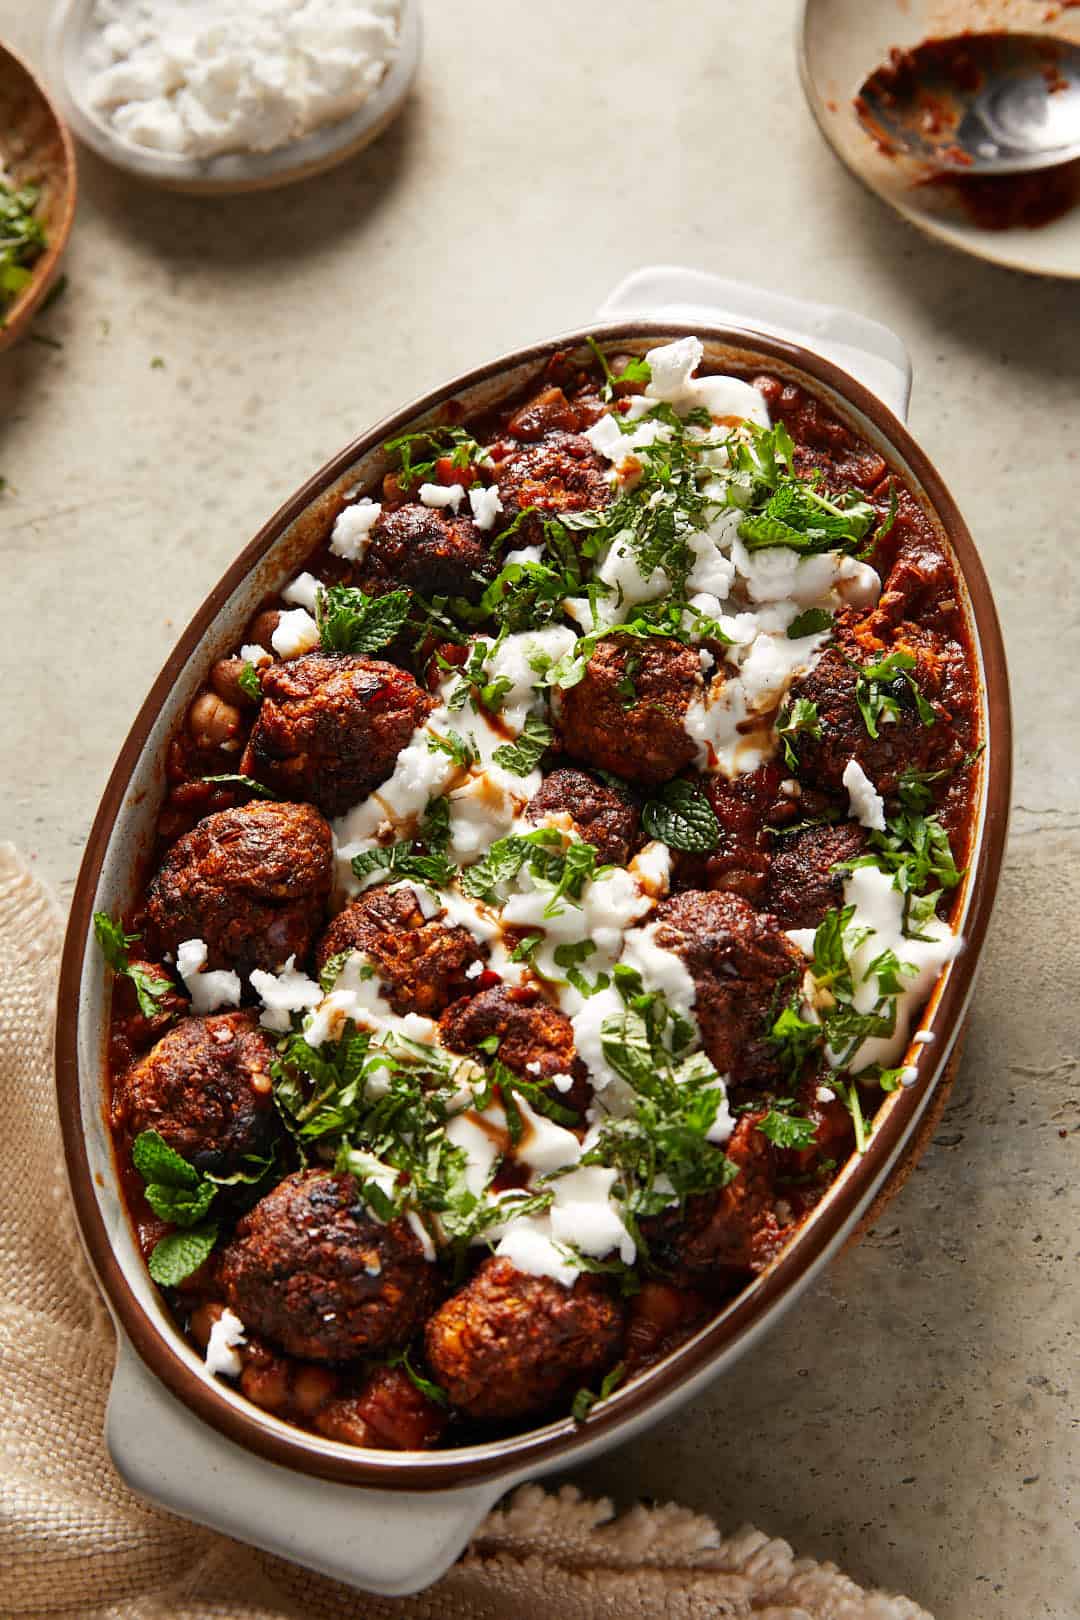 Spicy harissa vegan meatballs in a oval casserole dish on a grey stone backdrop